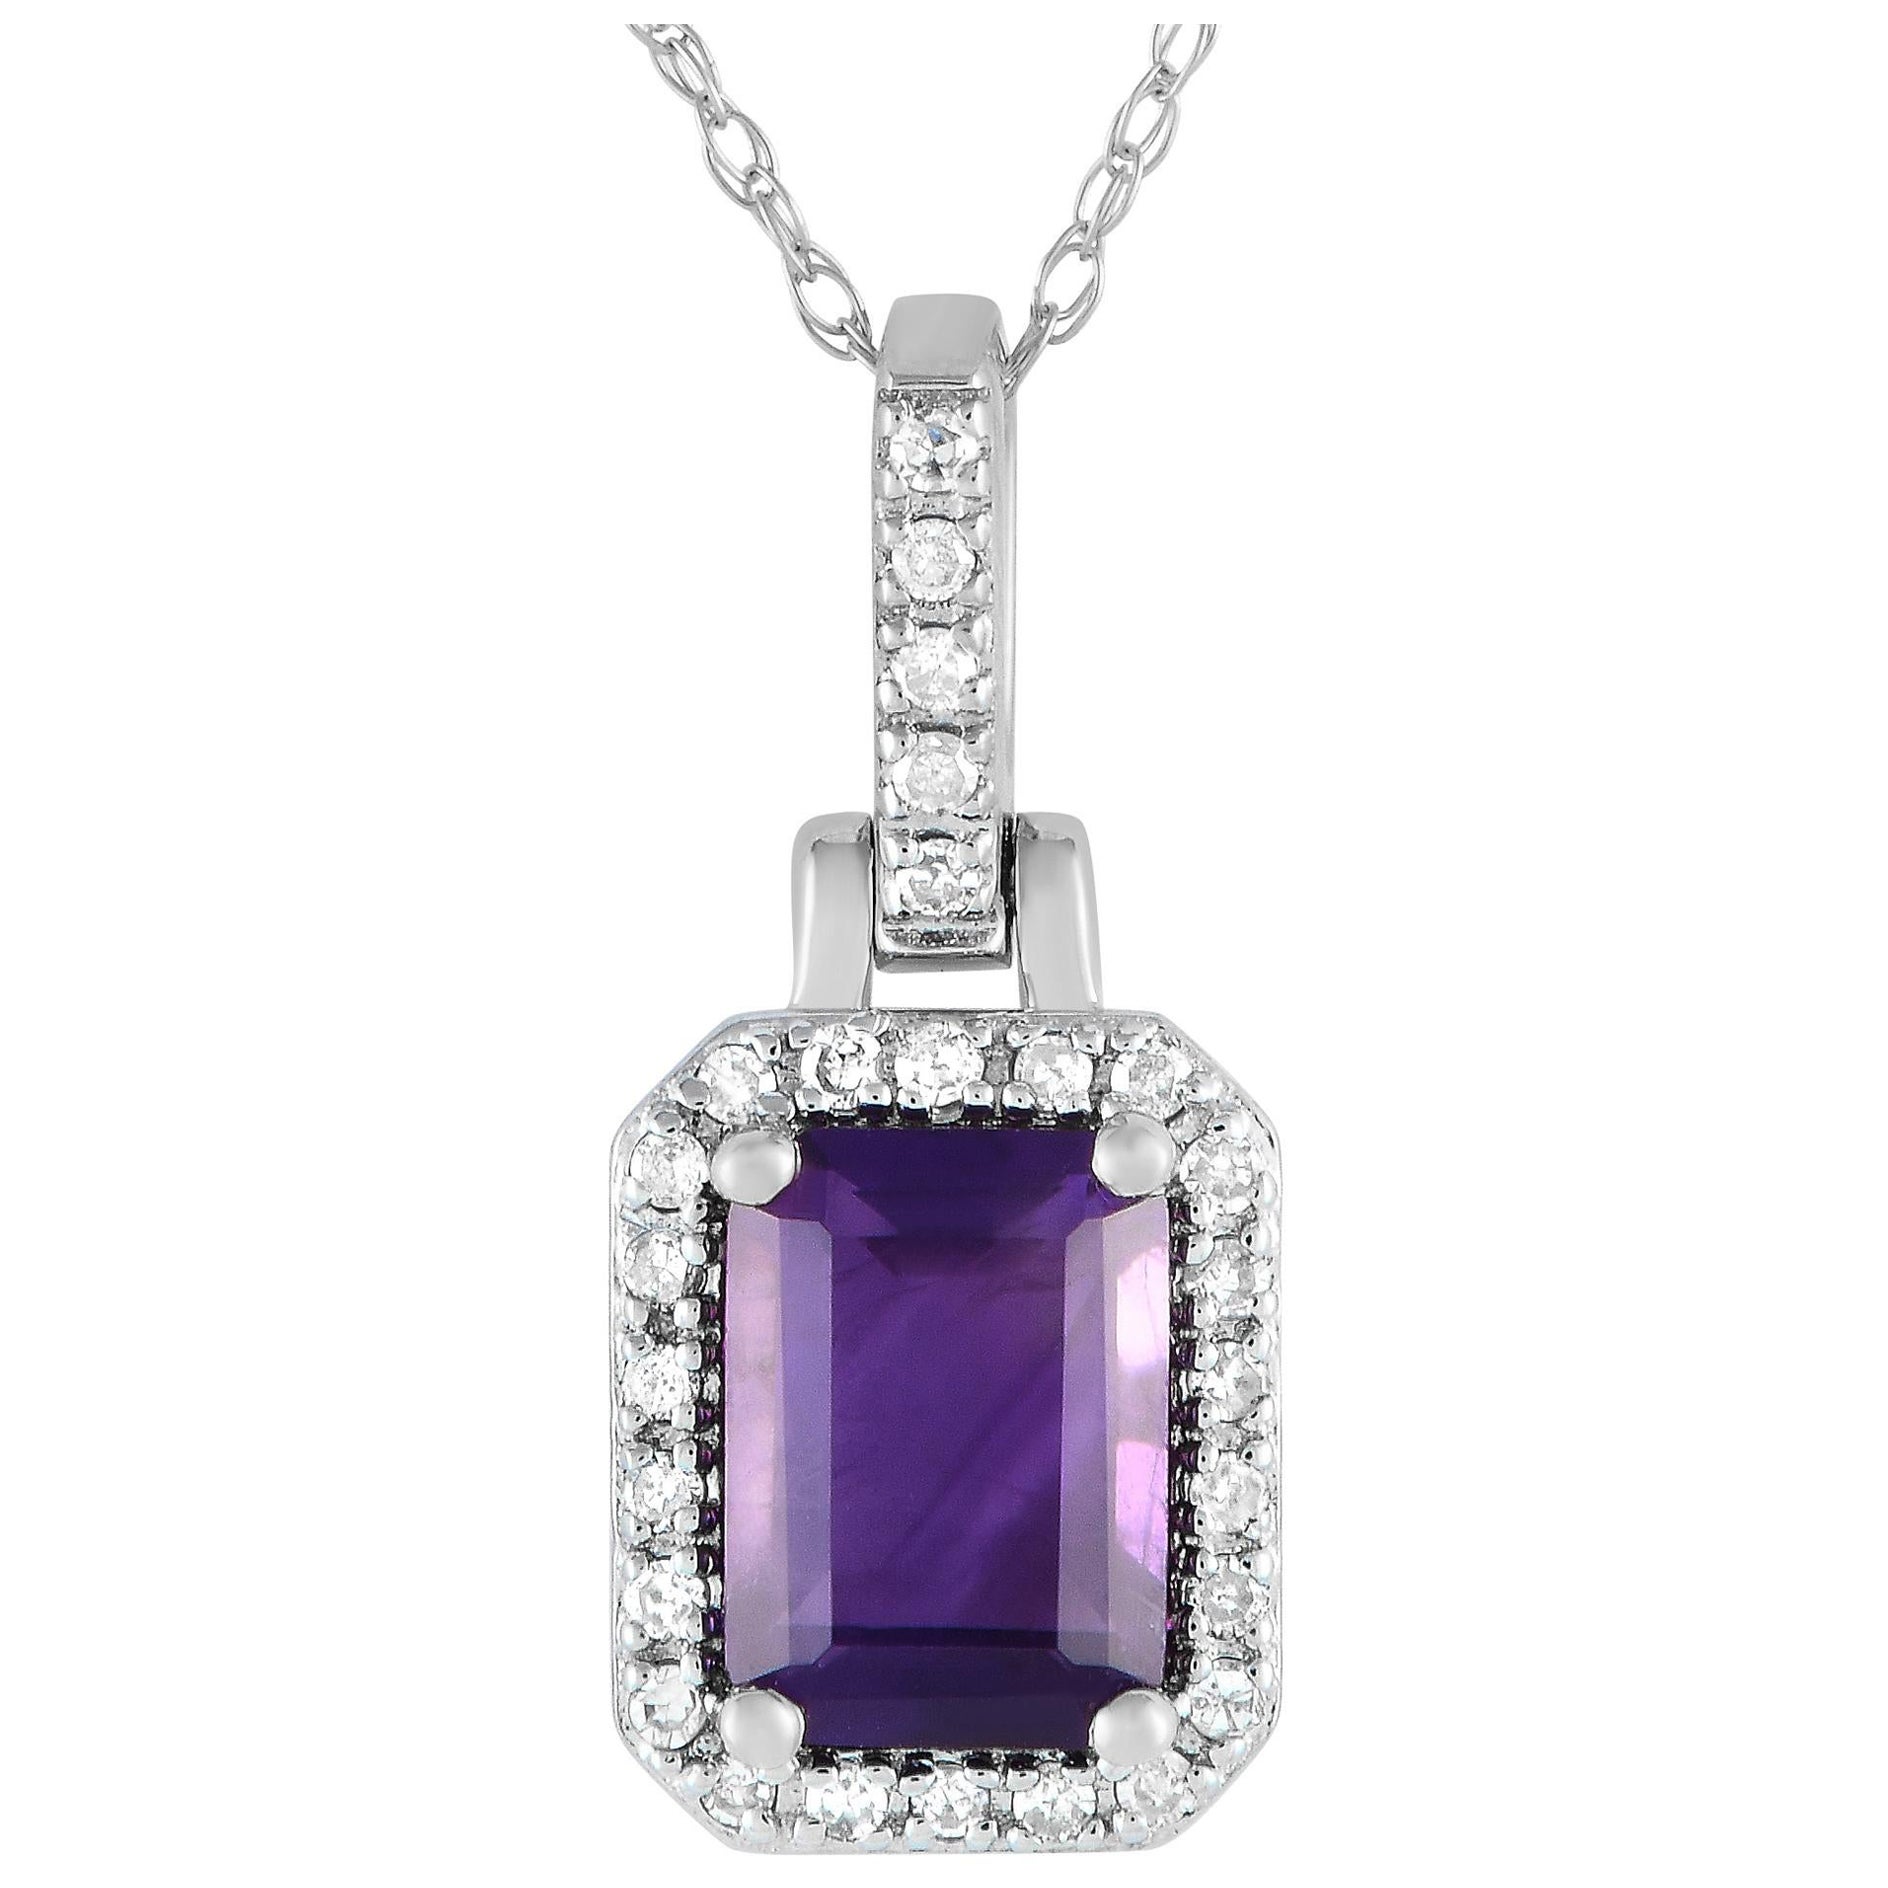 LB Exclusive 14K White Gold 0.12ct Diamond & Amethyst Necklace PD4-15501WAM For Sale